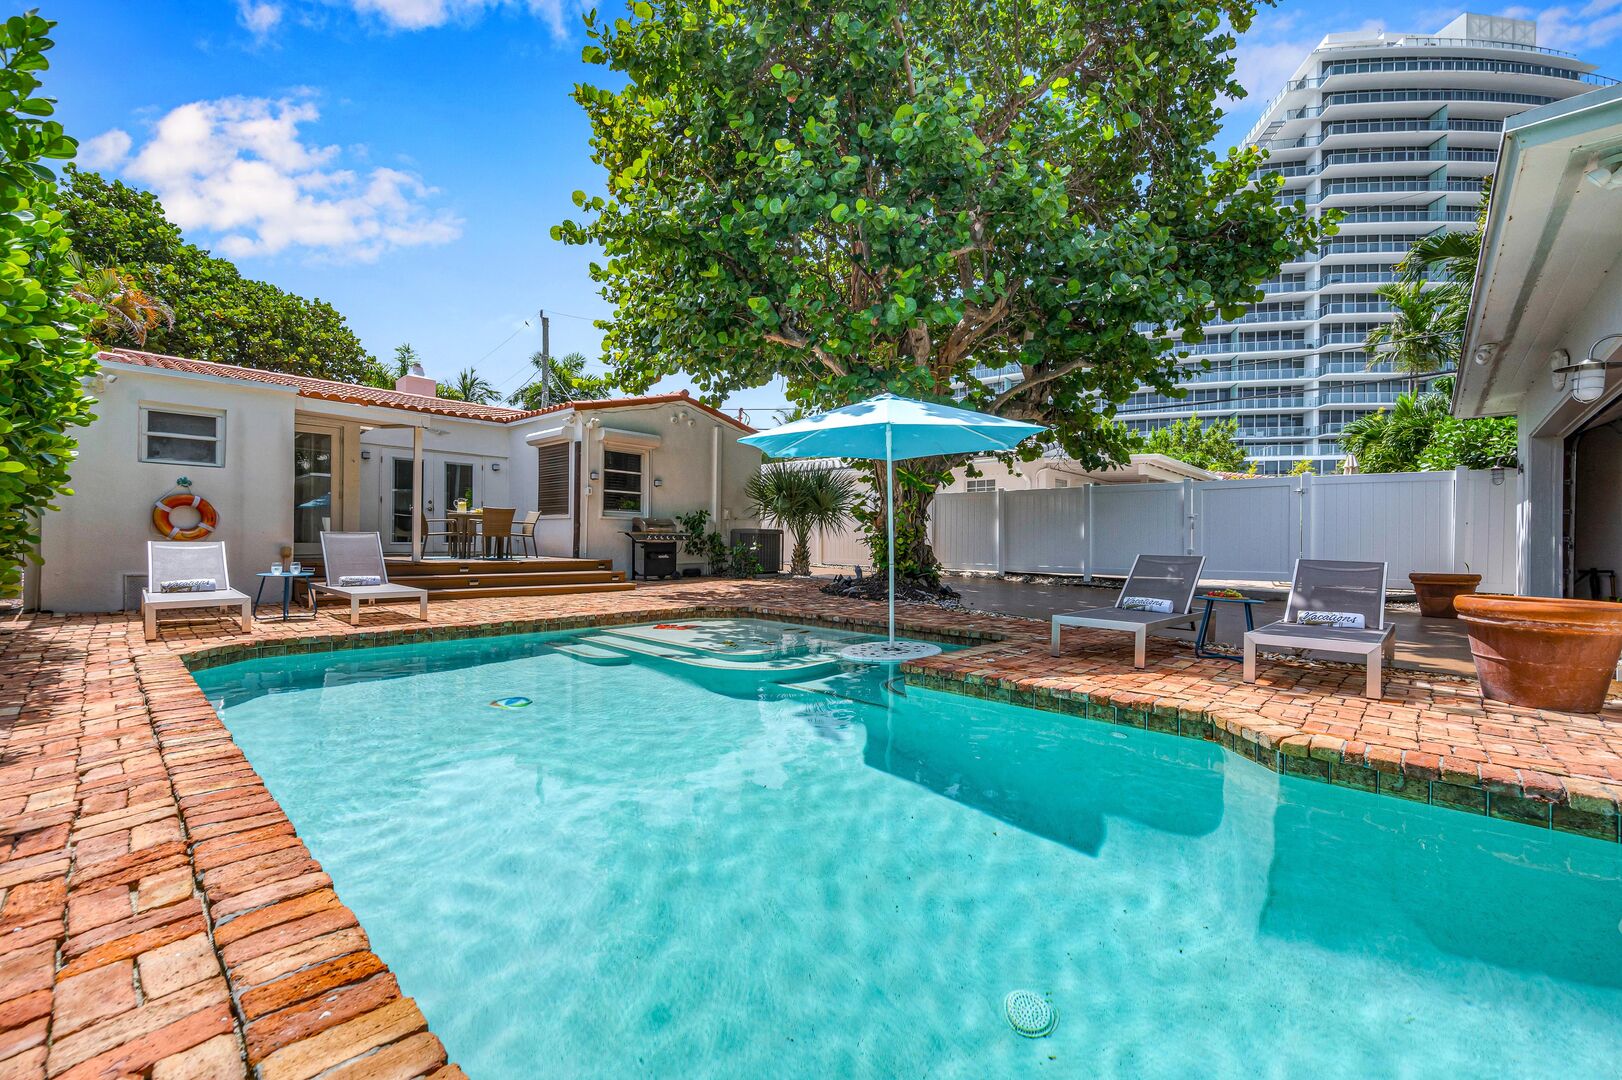 Outside, you will find the heated saltwater pool and plenty of chairs.